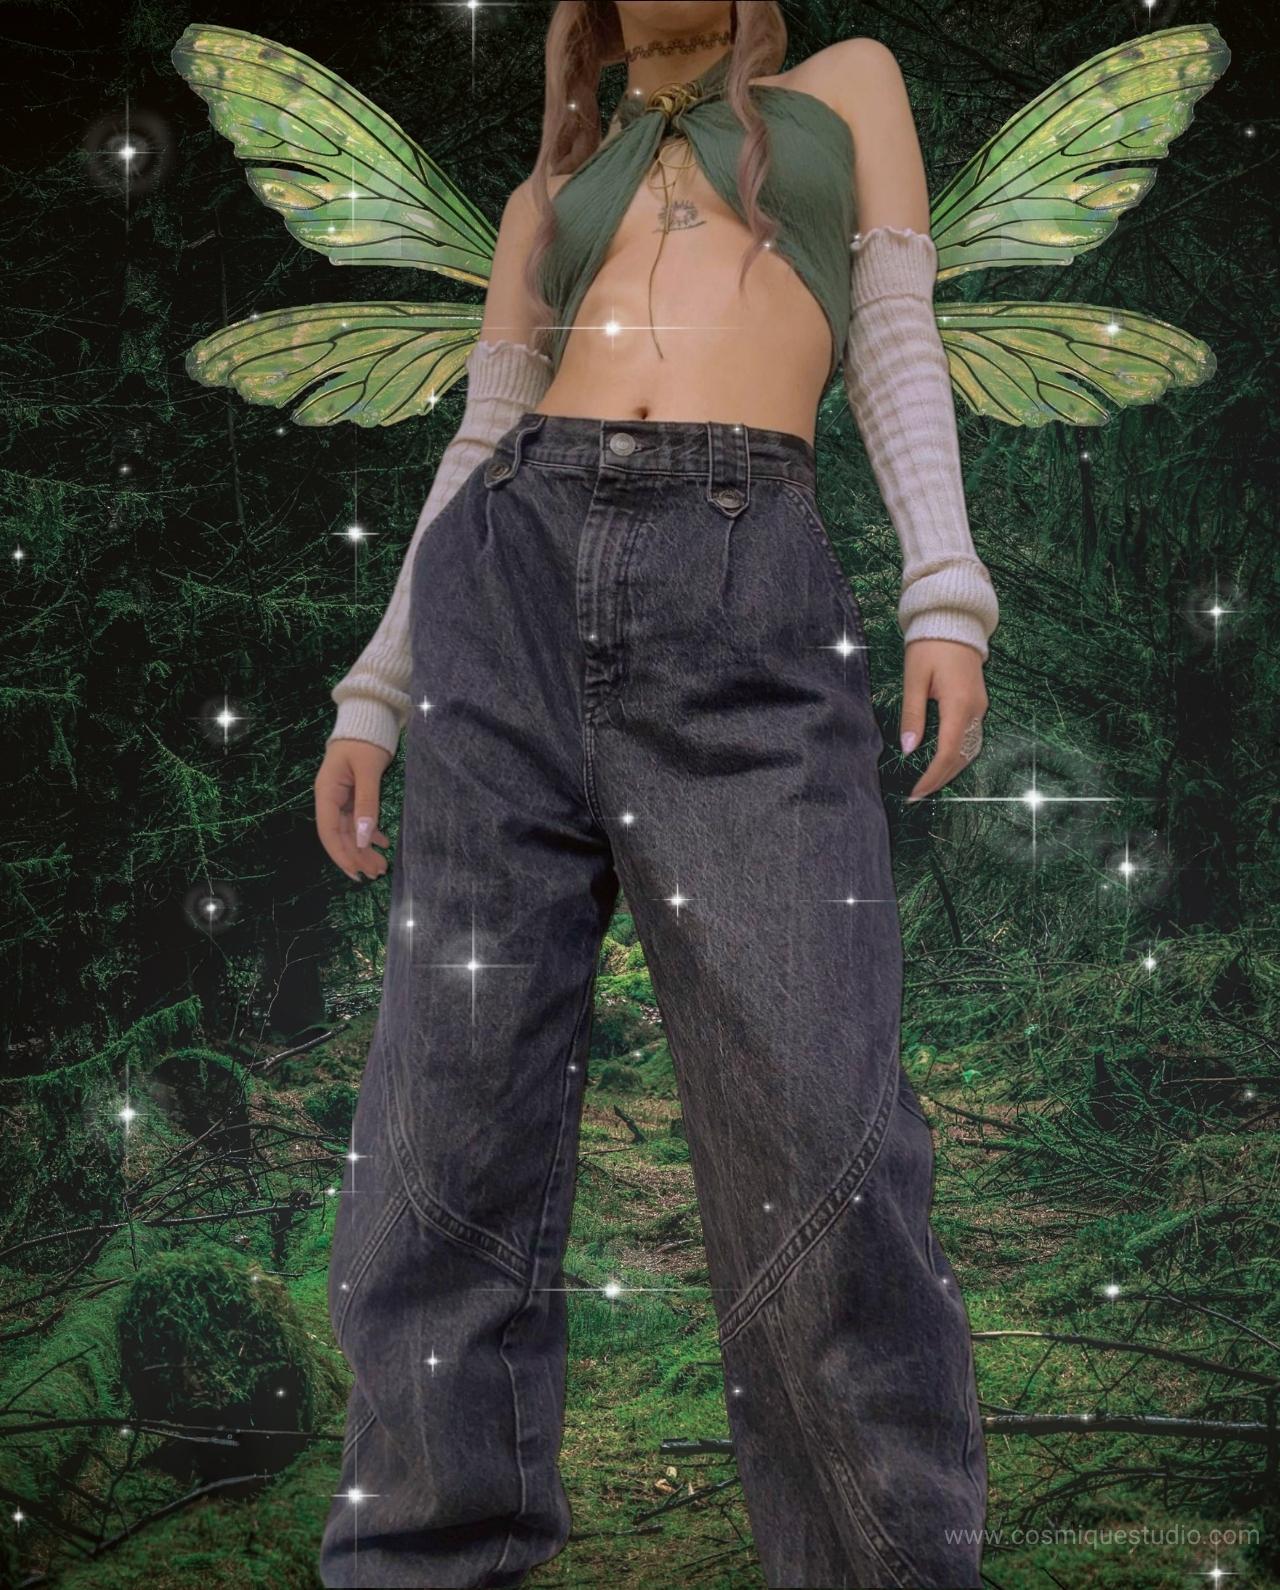 Fairy grunge aesthetic outfits and accessories such as a green crop top, pants, fairy wings and a choker.